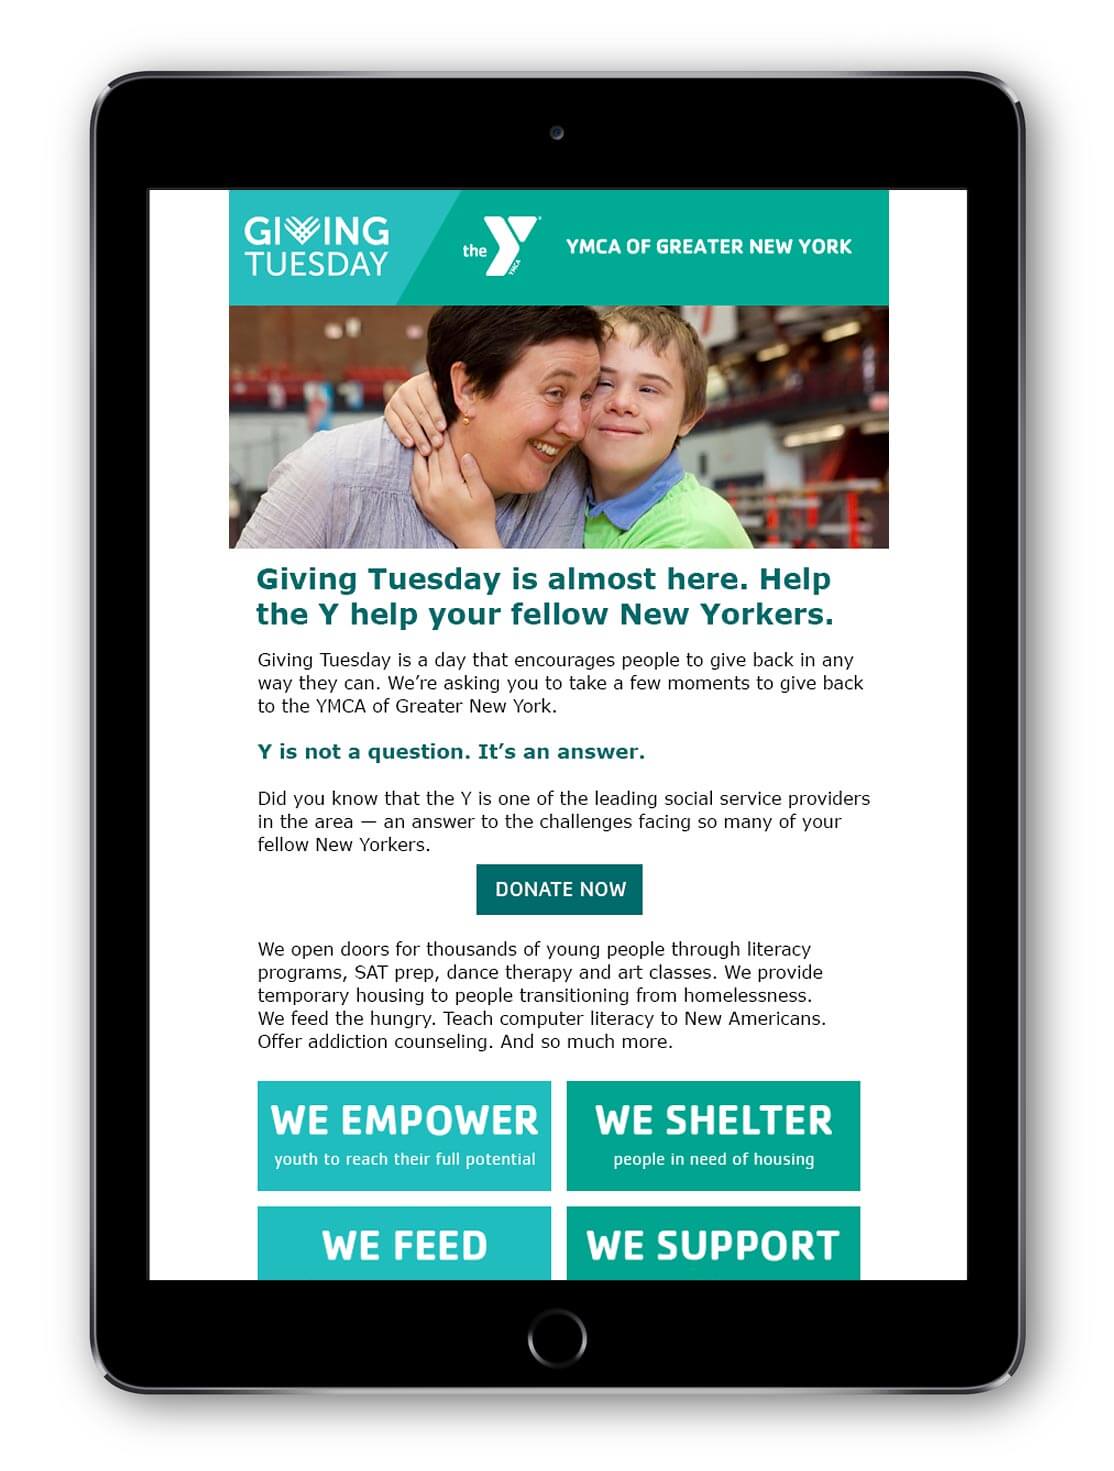 YMCA. Giving Tuesday is almost here.